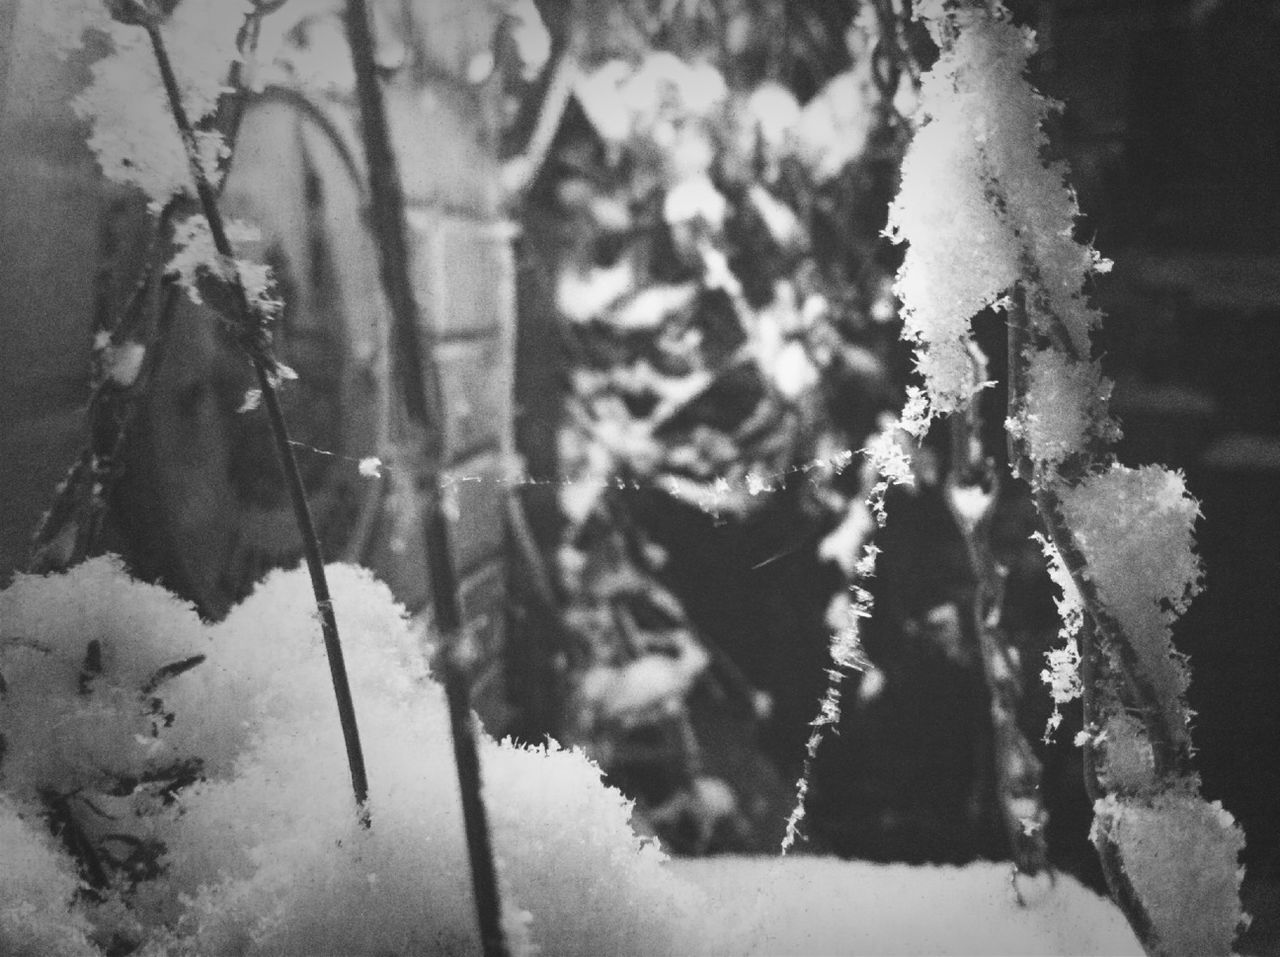 snow, winter, cold temperature, season, nature, growth, tree, weather, frozen, focus on foreground, beauty in nature, close-up, tranquility, plant, branch, outdoors, day, covering, white color, no people